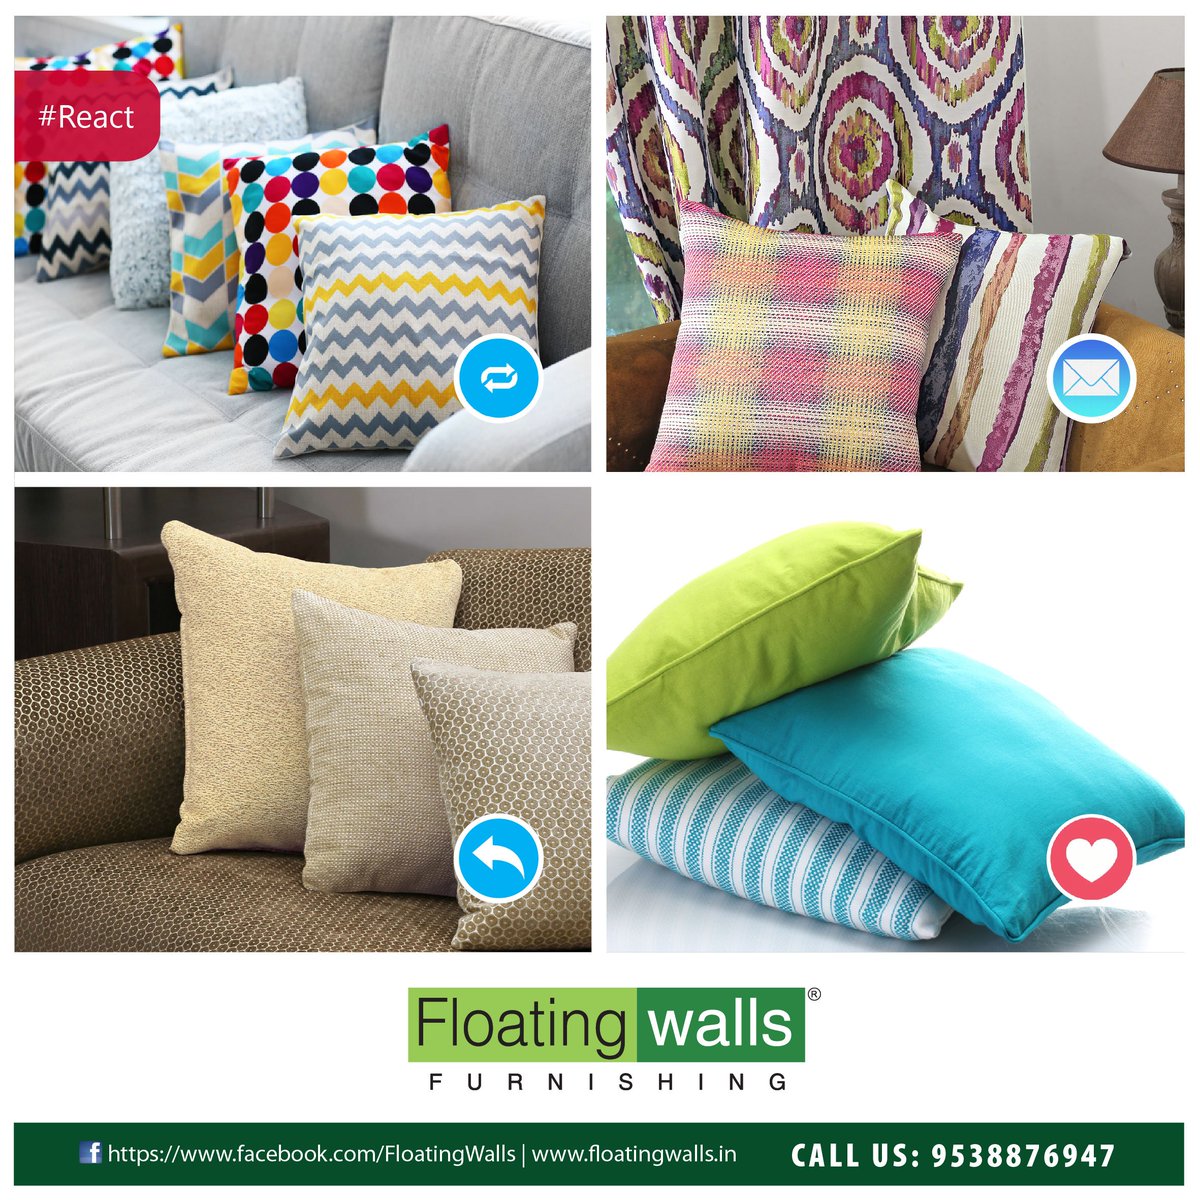 React with your preference for Upholstery design(s). floatingwalls.in
#React #Like #Share #Comment #UpholsteryDesign